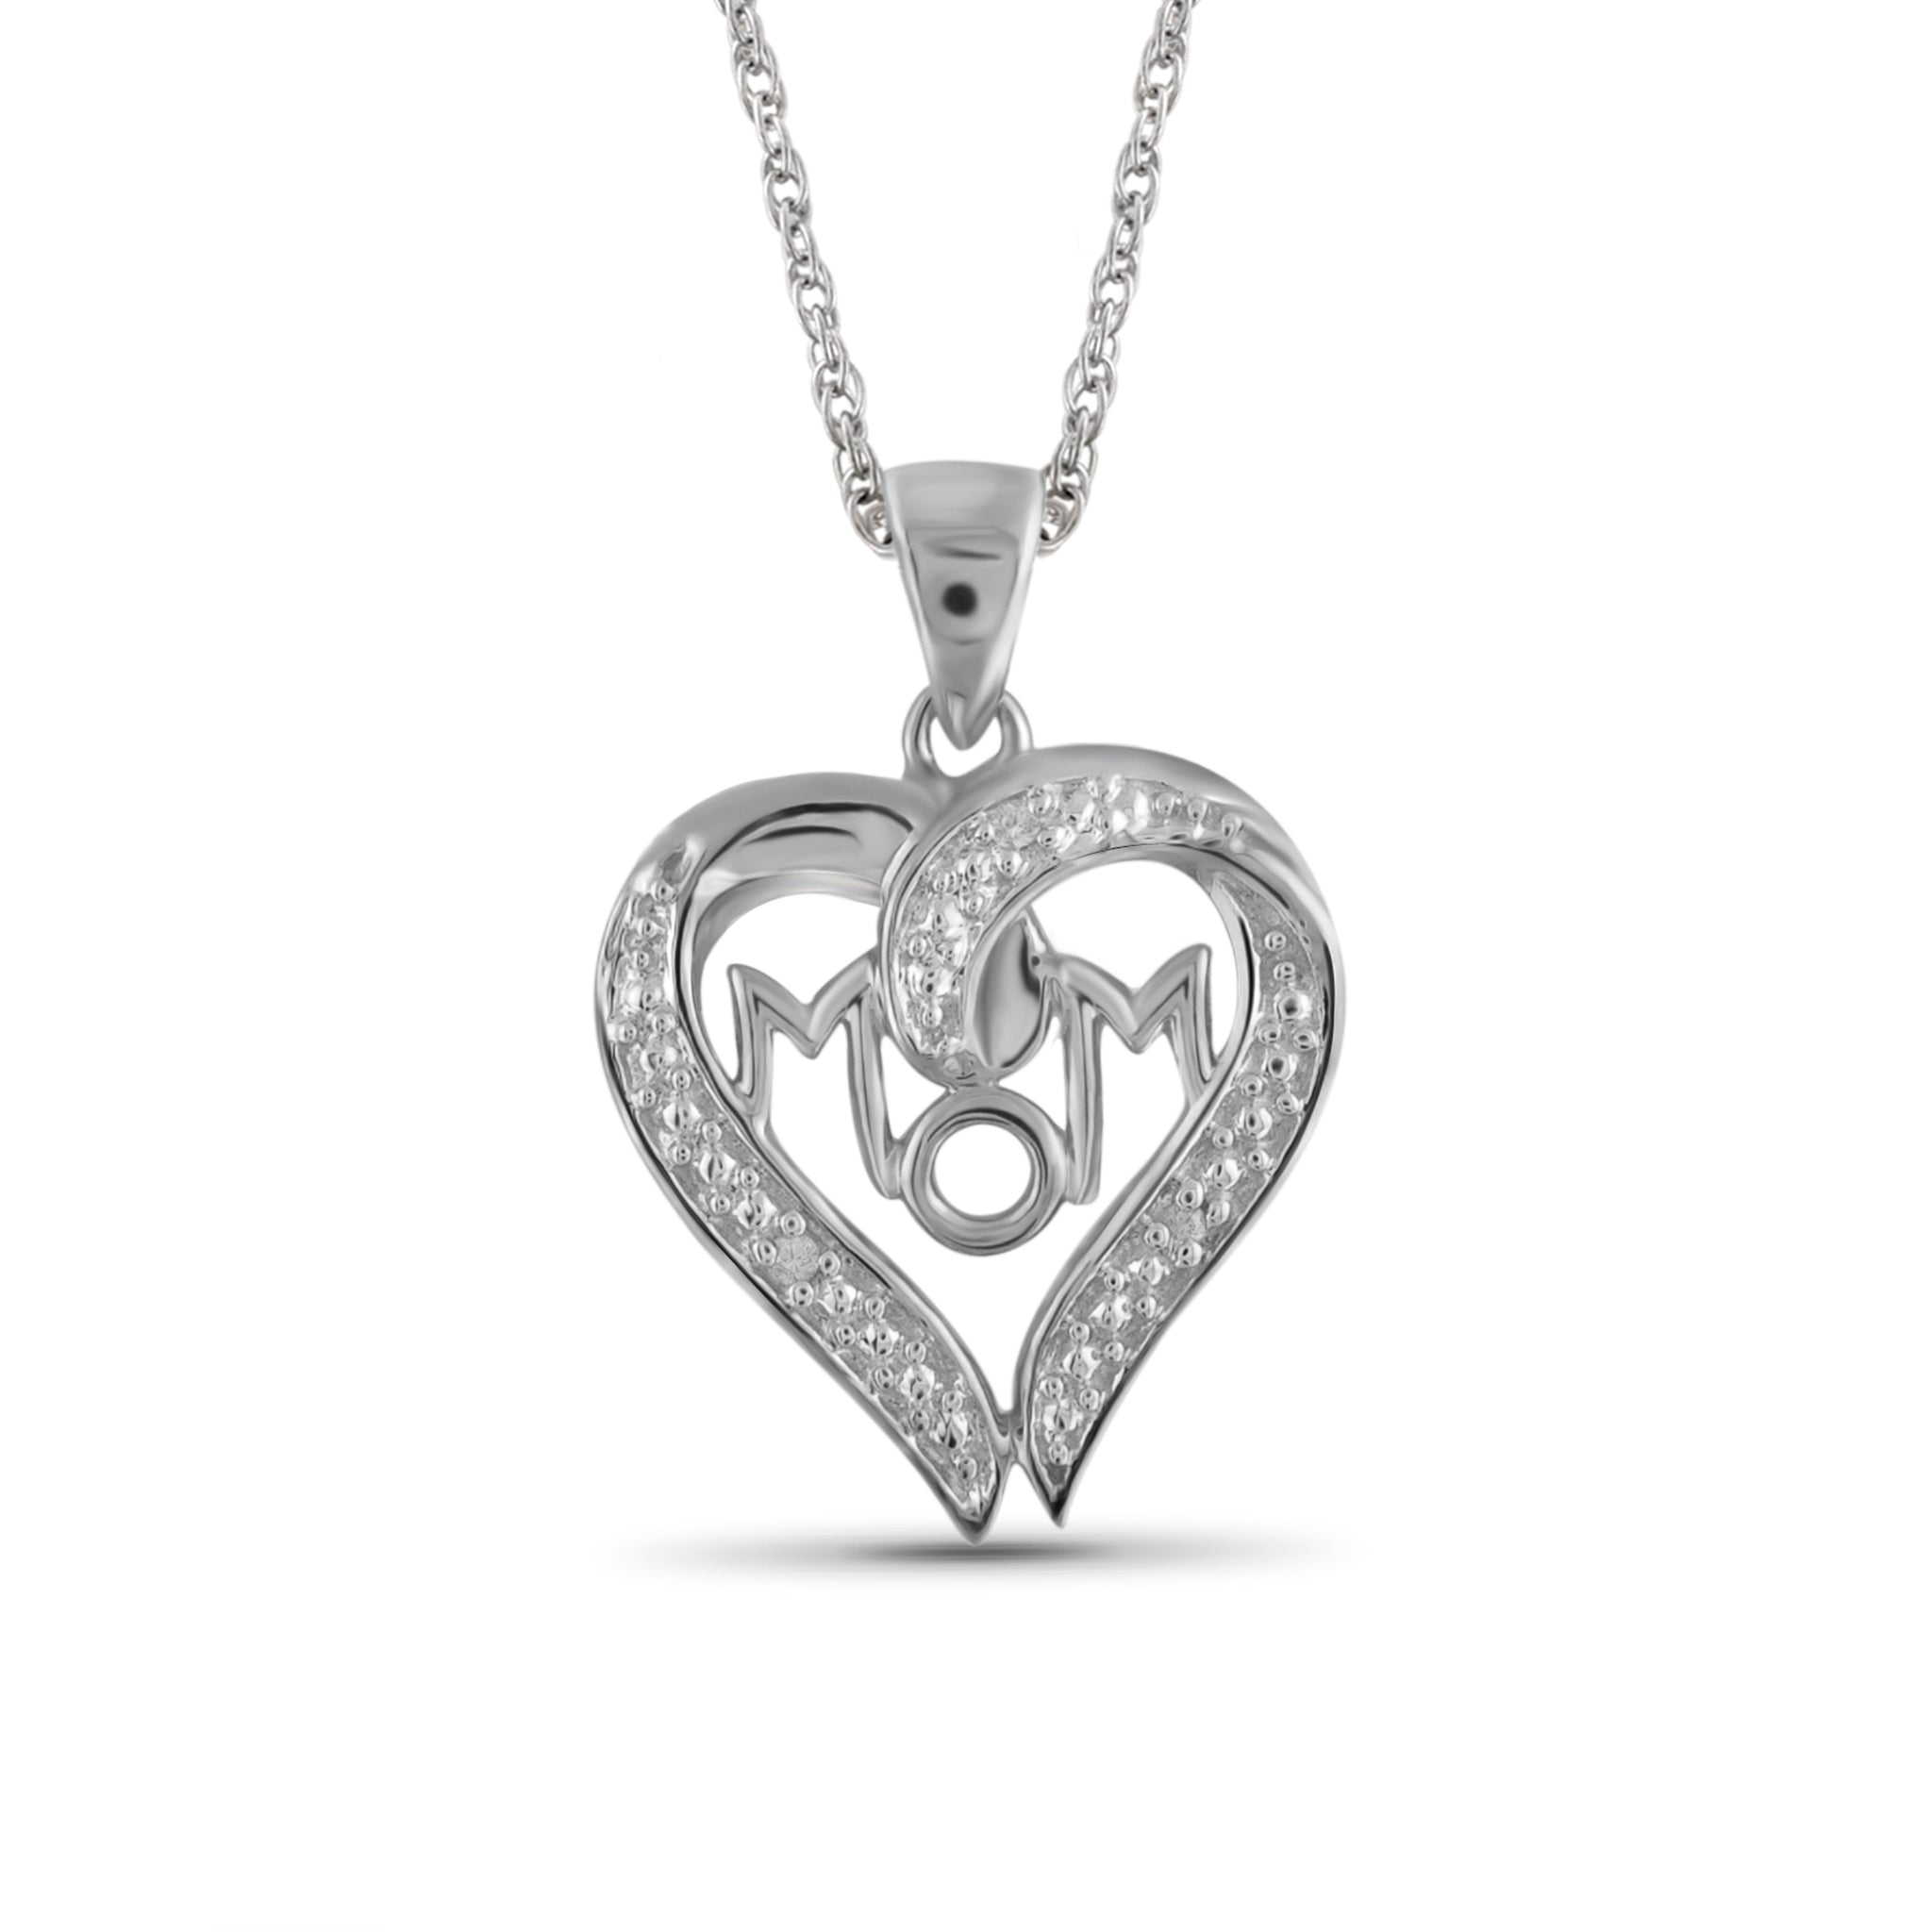 JewelonFire White Diamond Accent Sterling Silver Mom Heart Pendant - Assorted Colors